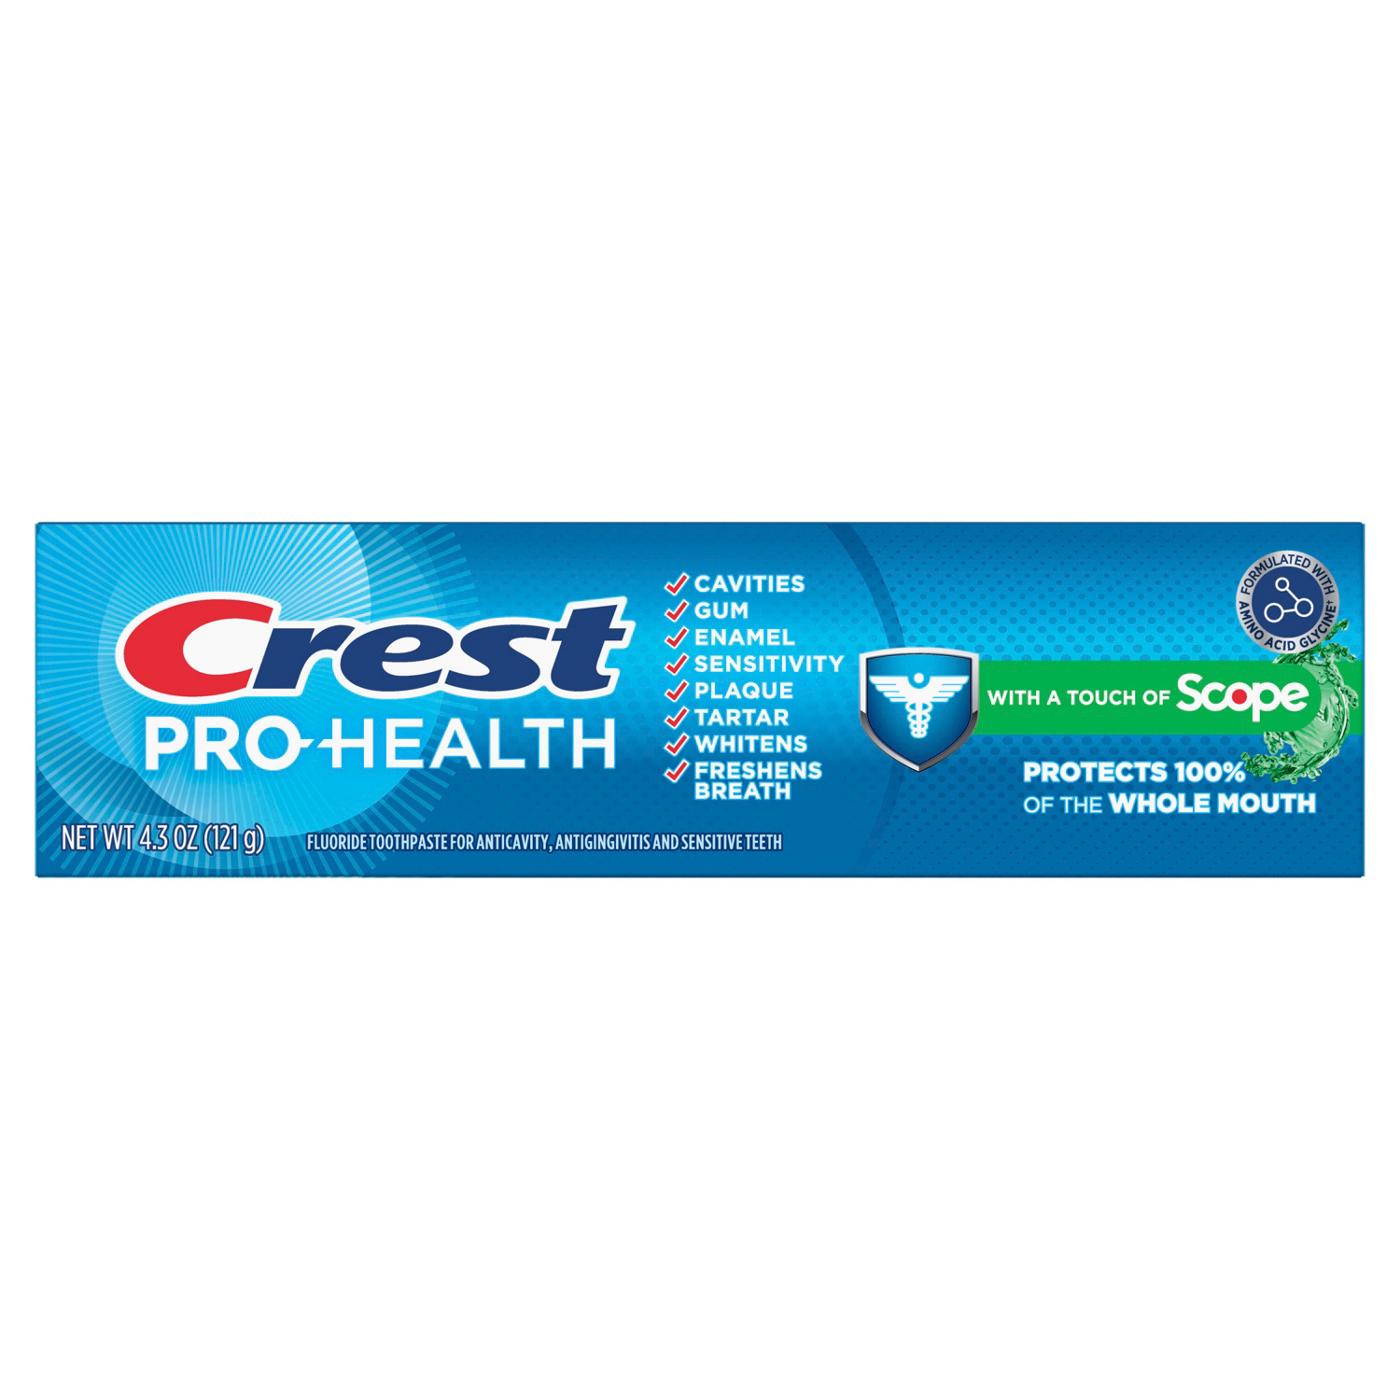 Crest Pro-Health with a Touch of Scope Gel Toothpaste; image 1 of 10